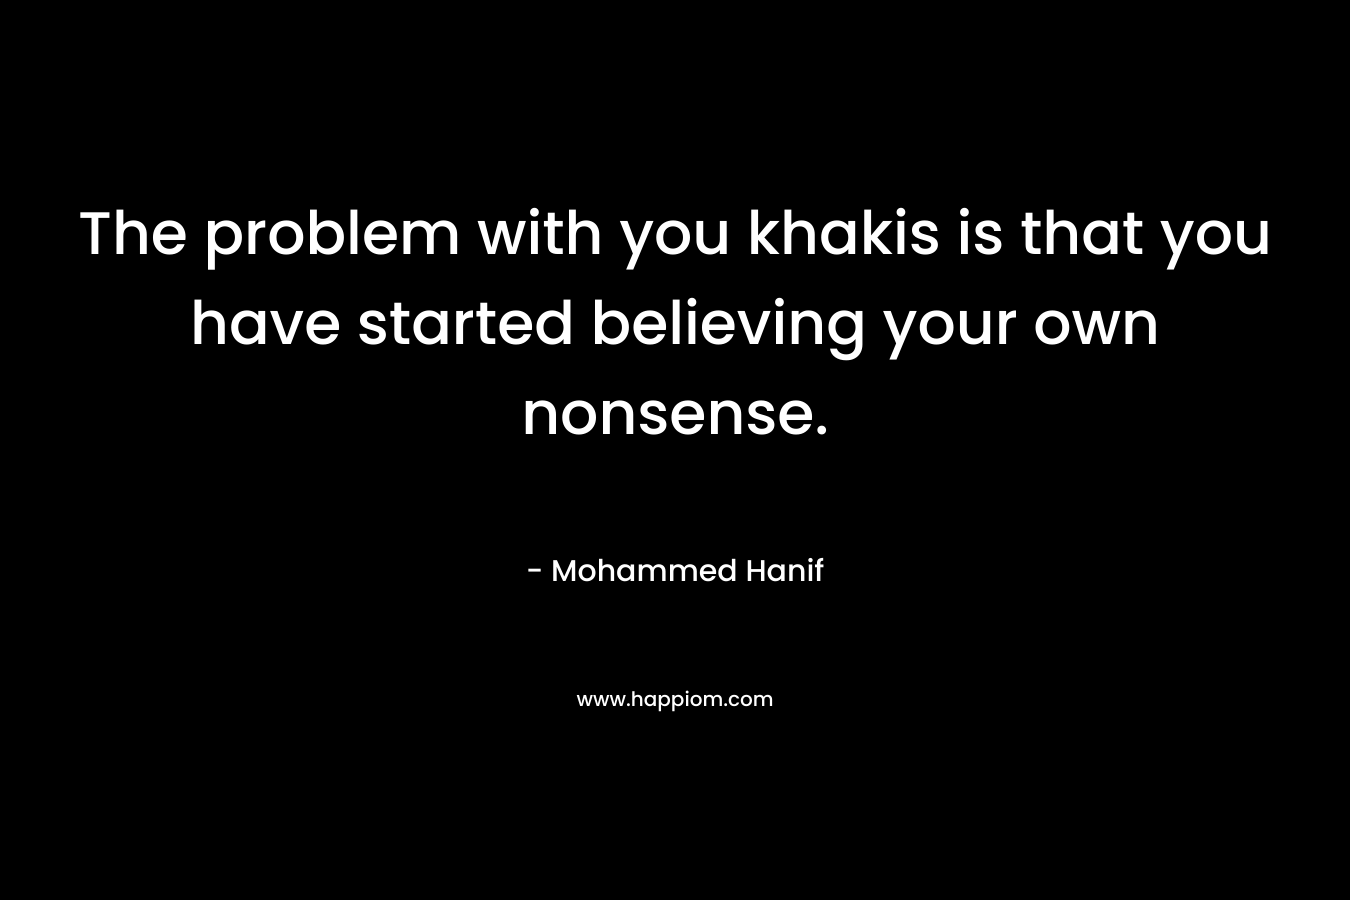 The problem with you khakis is that you have started believing your own nonsense. – Mohammed Hanif